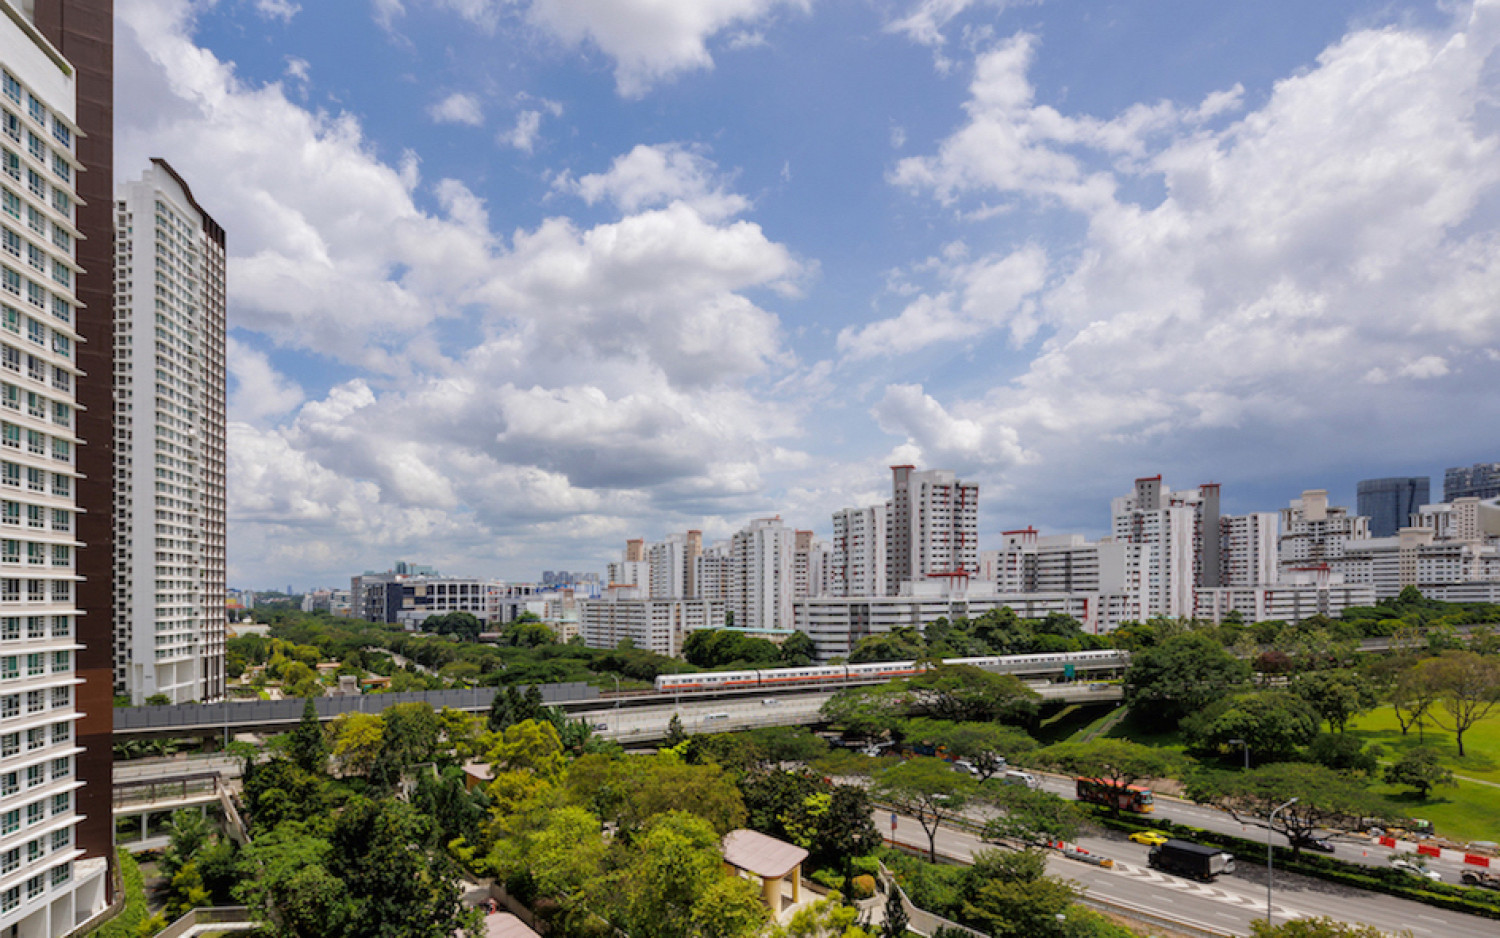 HDB resale prices in 1Q2022 up 2.4% q-o-q, transaction volume fell 12.7% - Property News